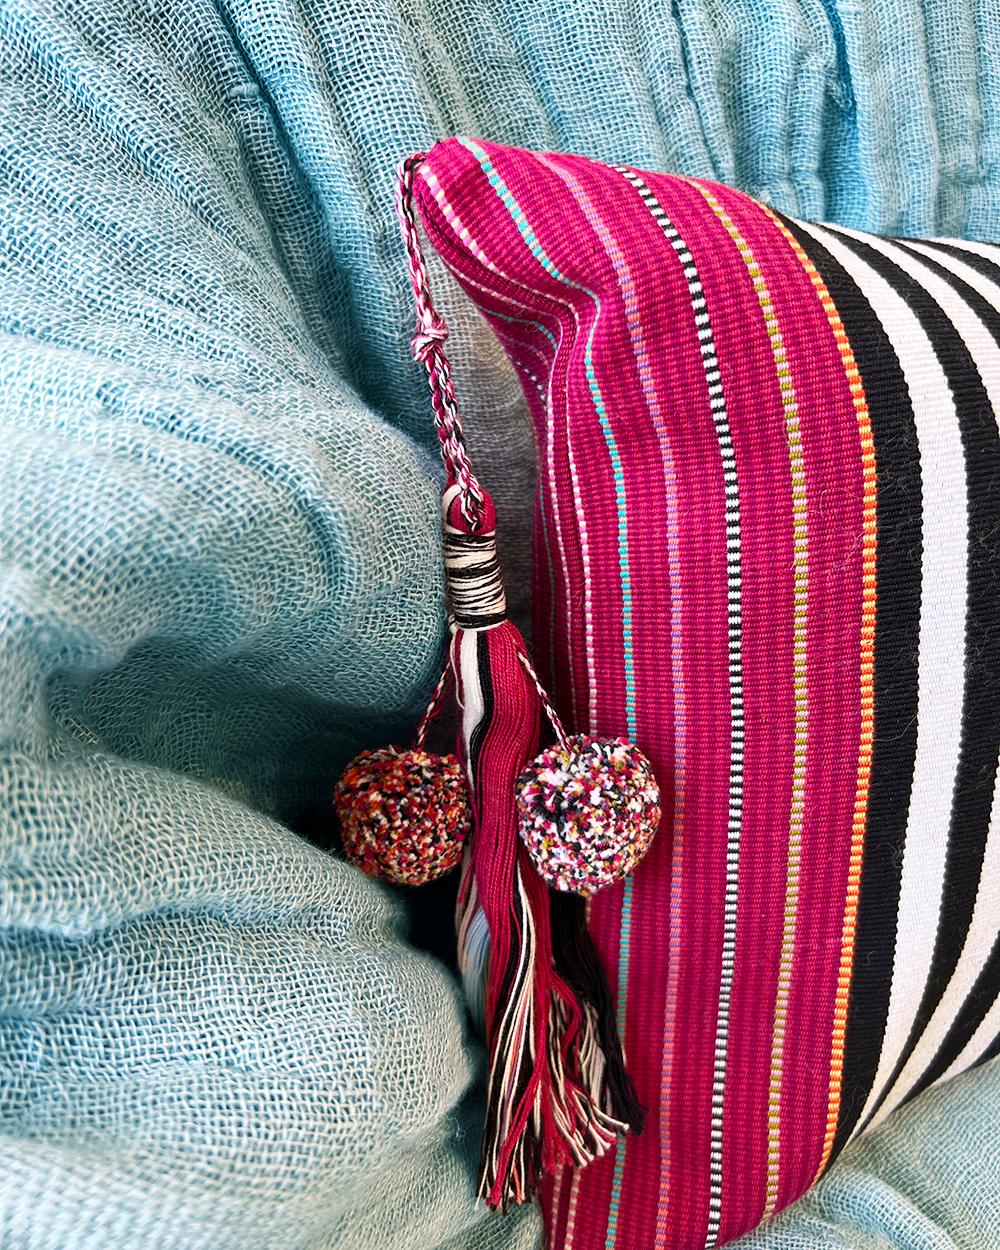 Hand-Woven Sancri Throw Pillow - Handwoven Mexican Cotton Black White and Magenta Cushion For Sale